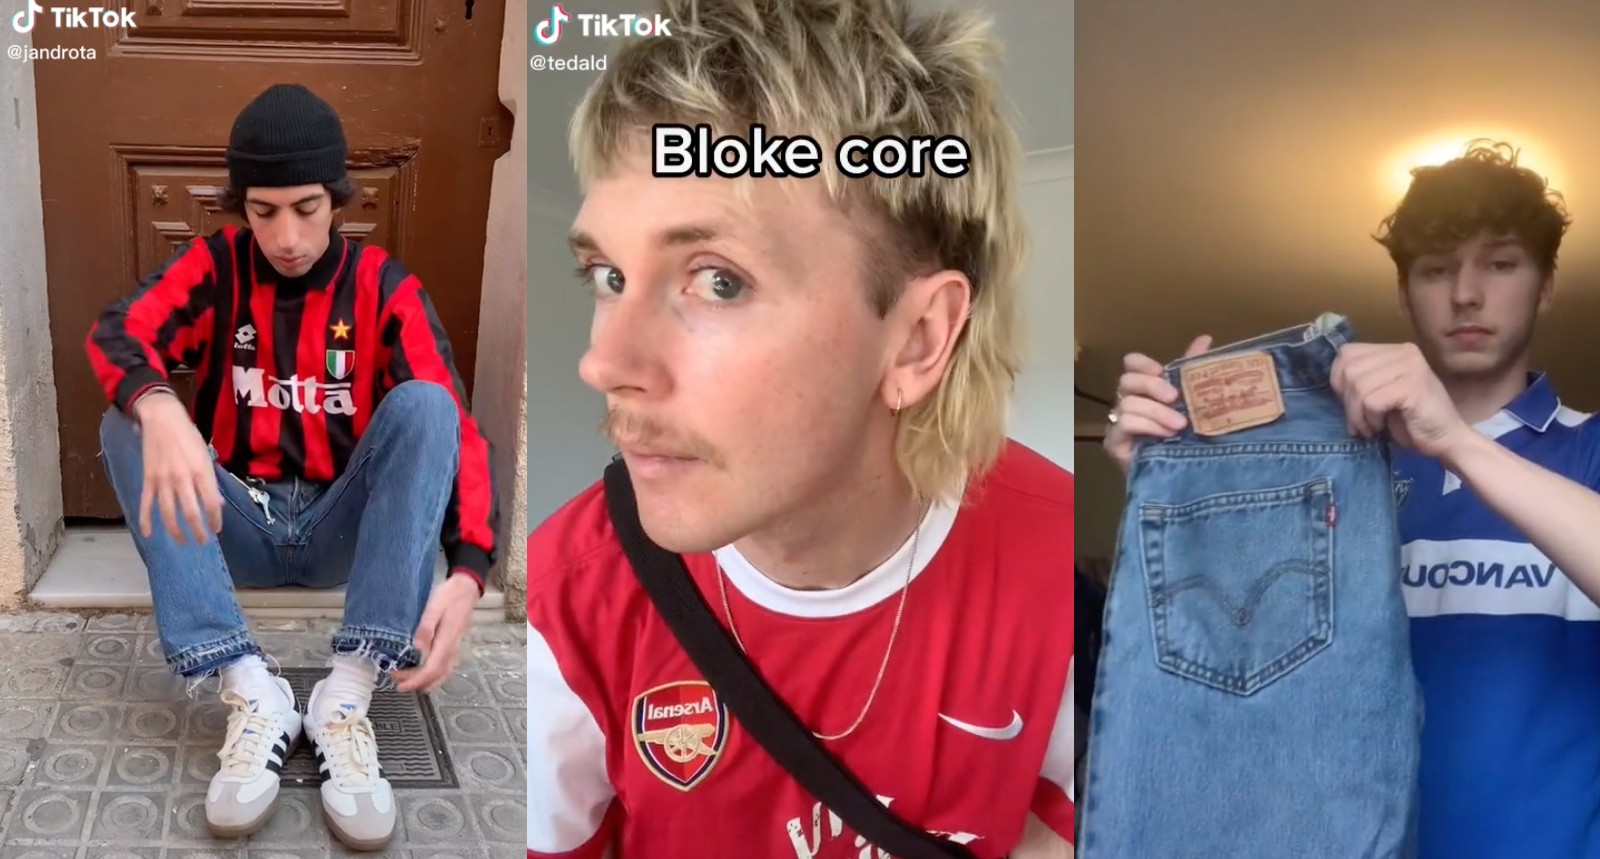 Blokecore: How A Trend Is Now A Staple In Fashion